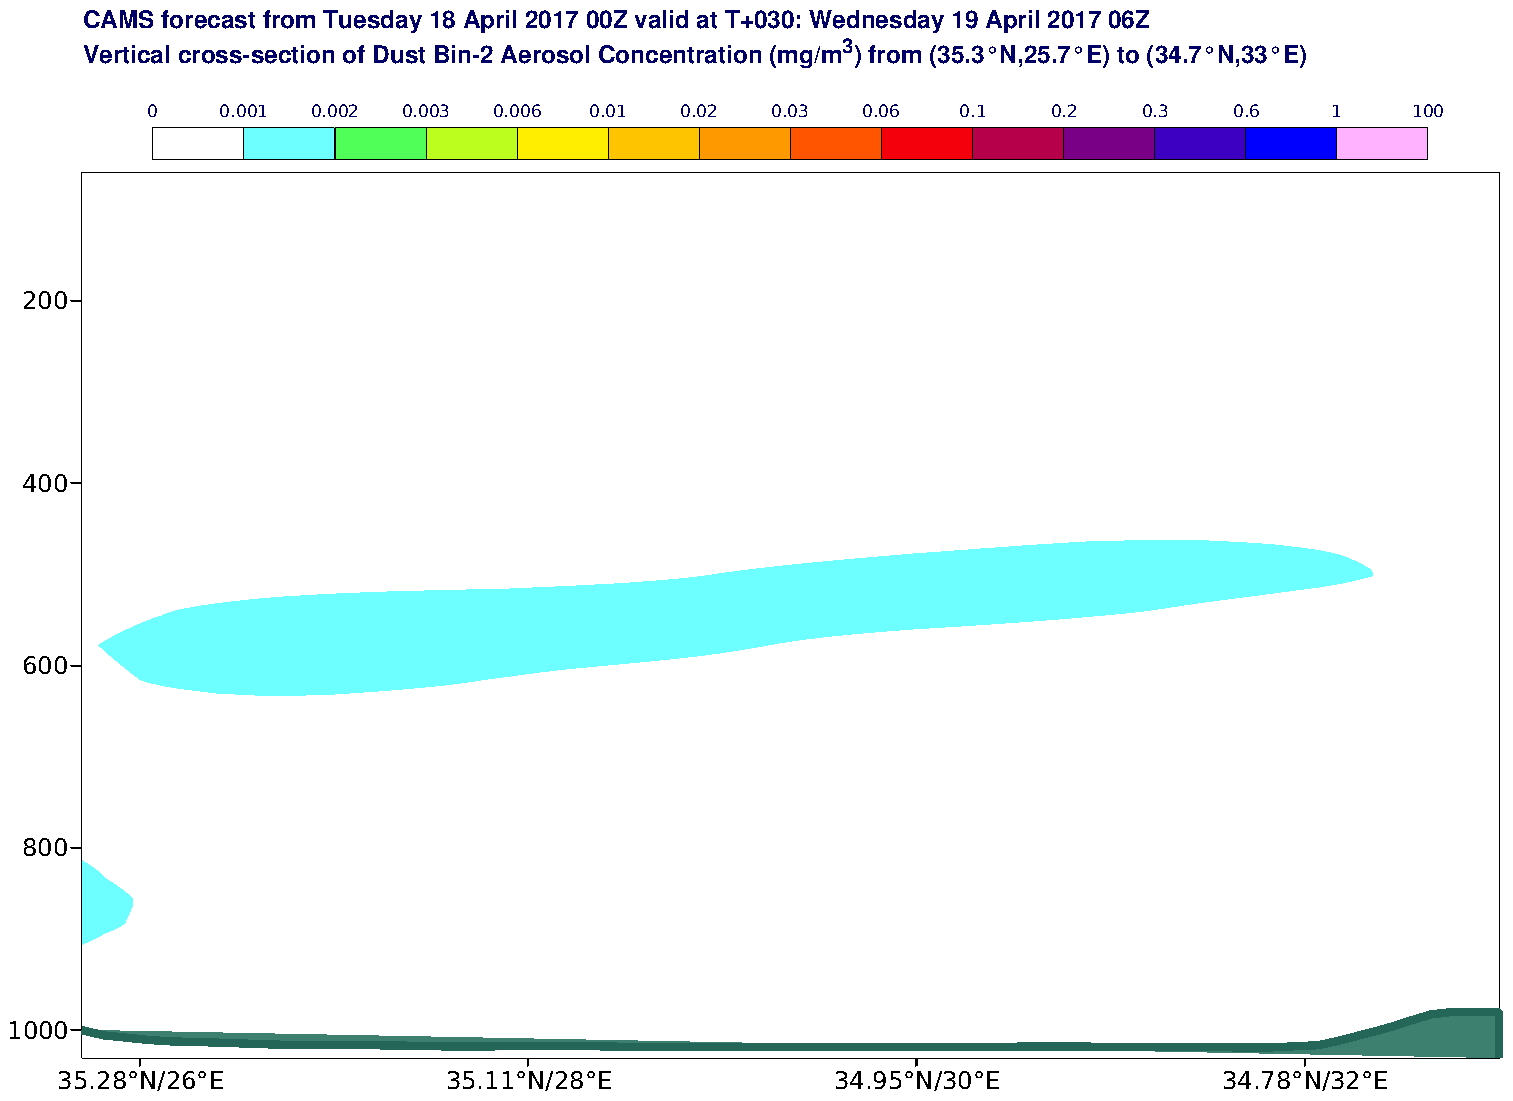 Vertical cross-section of Dust Bin-2 Aerosol Concentration (mg/m3) valid at T30 - 2017-04-19 06:00